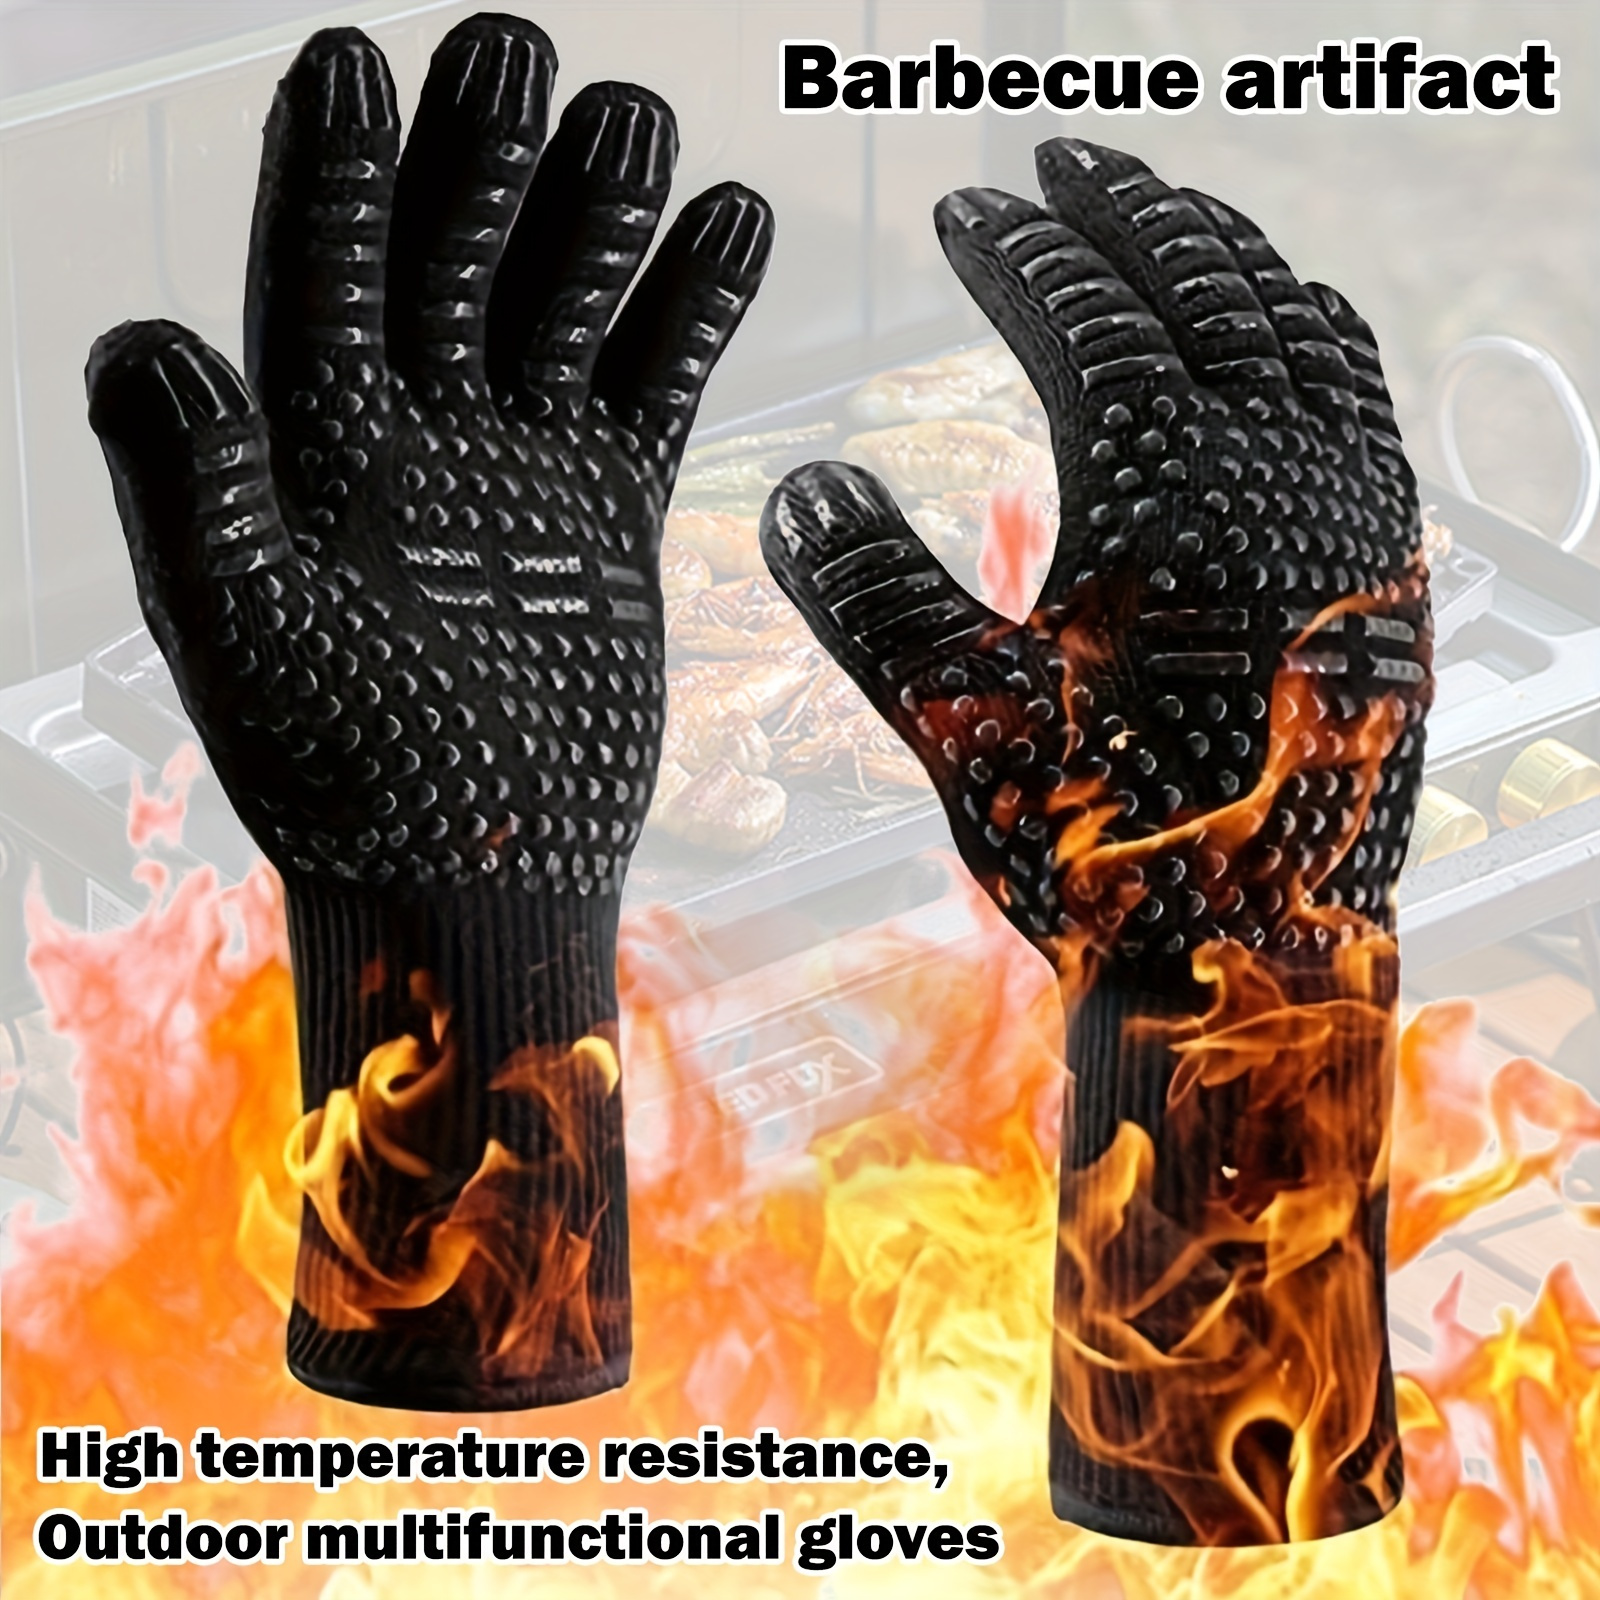 

1pc Heat-resistant Silicone Oven Mitt - Non-slip, Cut-proof For Kitchen, Bbq, Camping & Cookware